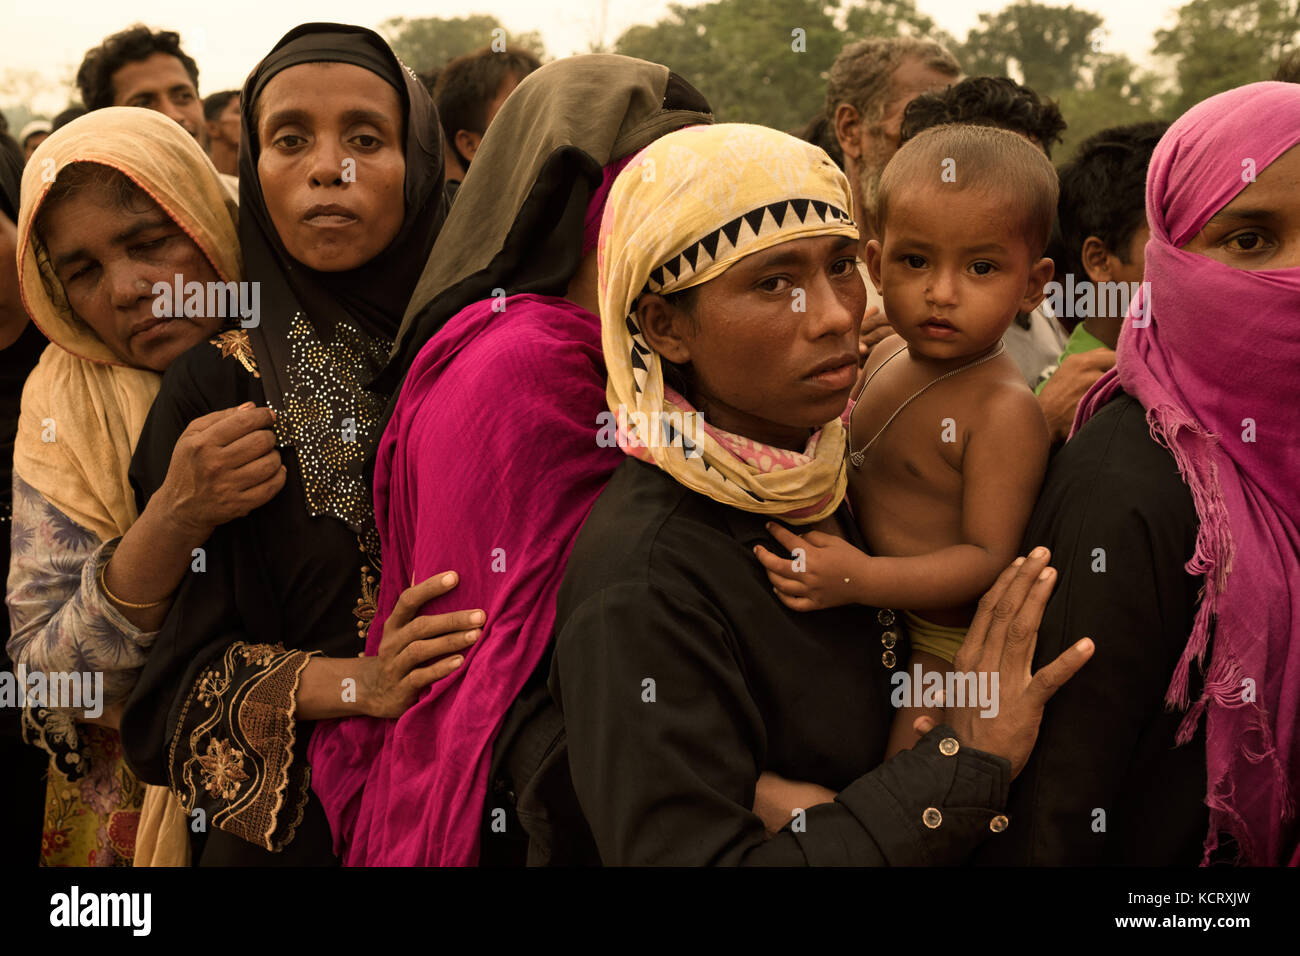 Refugee Crisis, Cox's Bazar, Bangladesh. There are an estimated 800,000+ people that have fled across the border from neighbouring Myanmar. Stock Photo